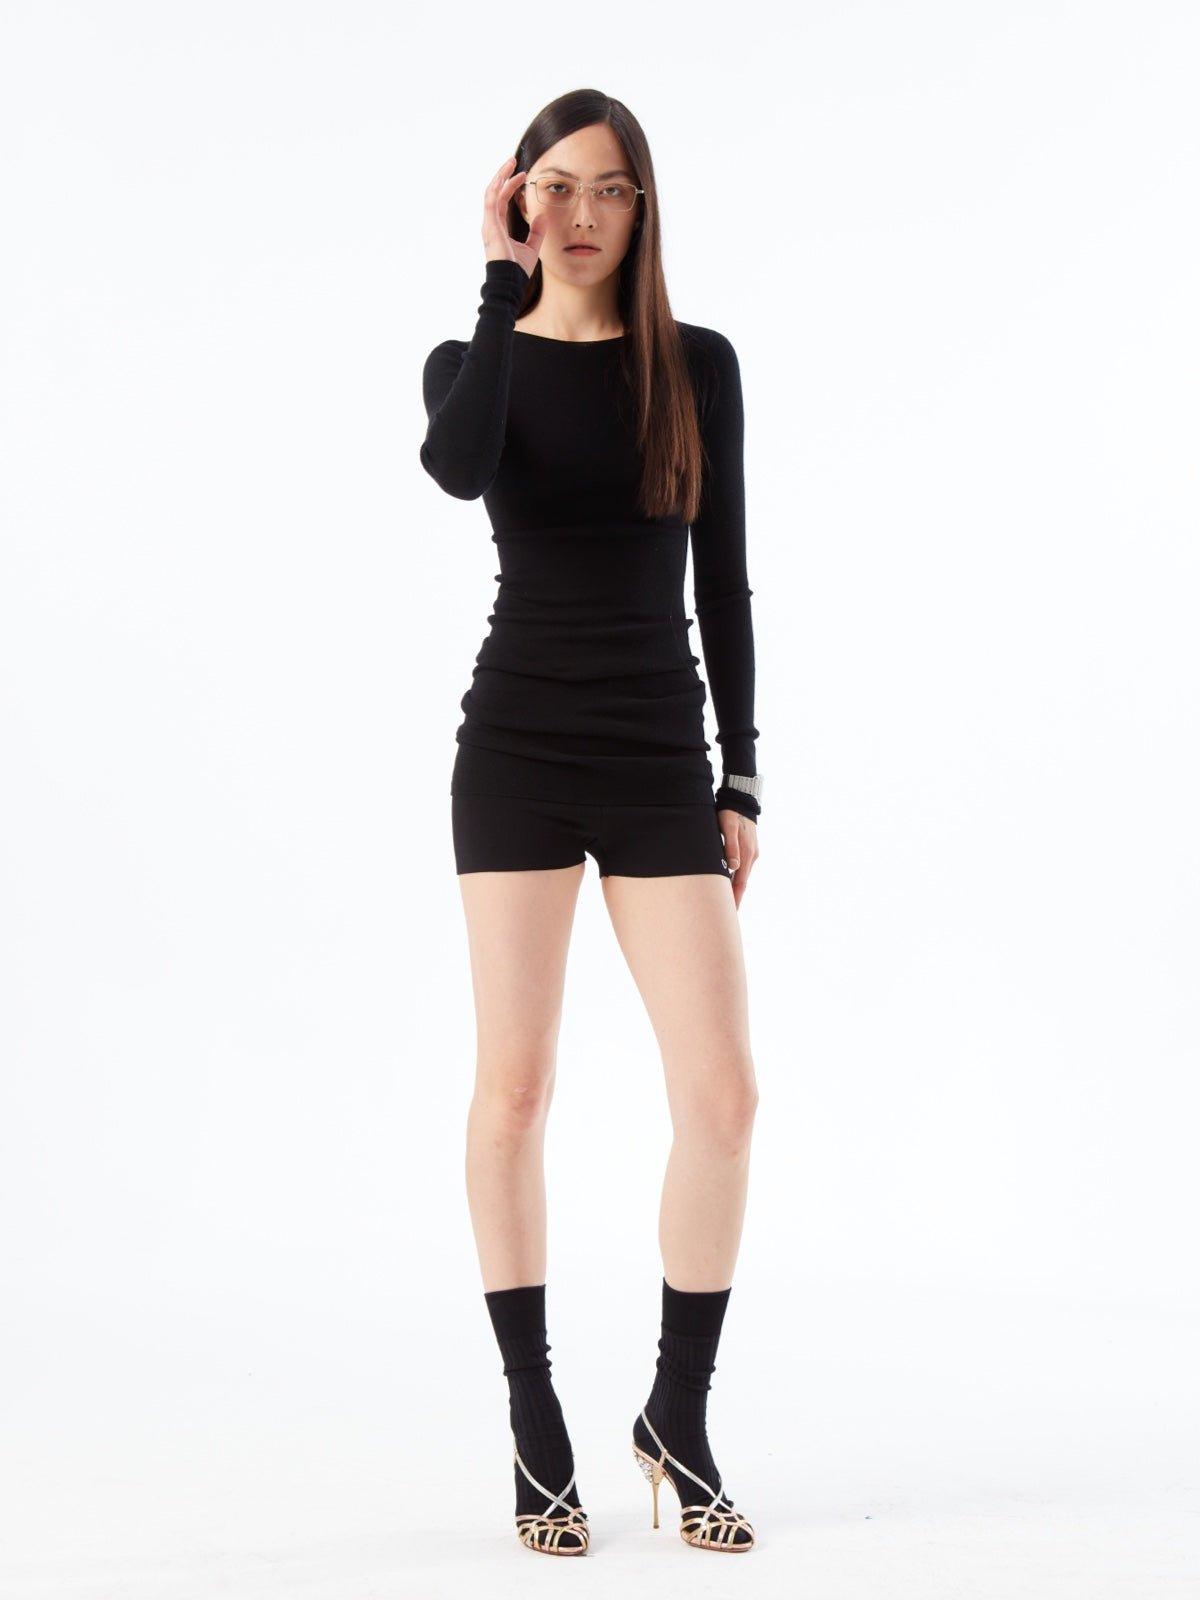 Round Neck Stacked Tight Knit Sweater AOA0006